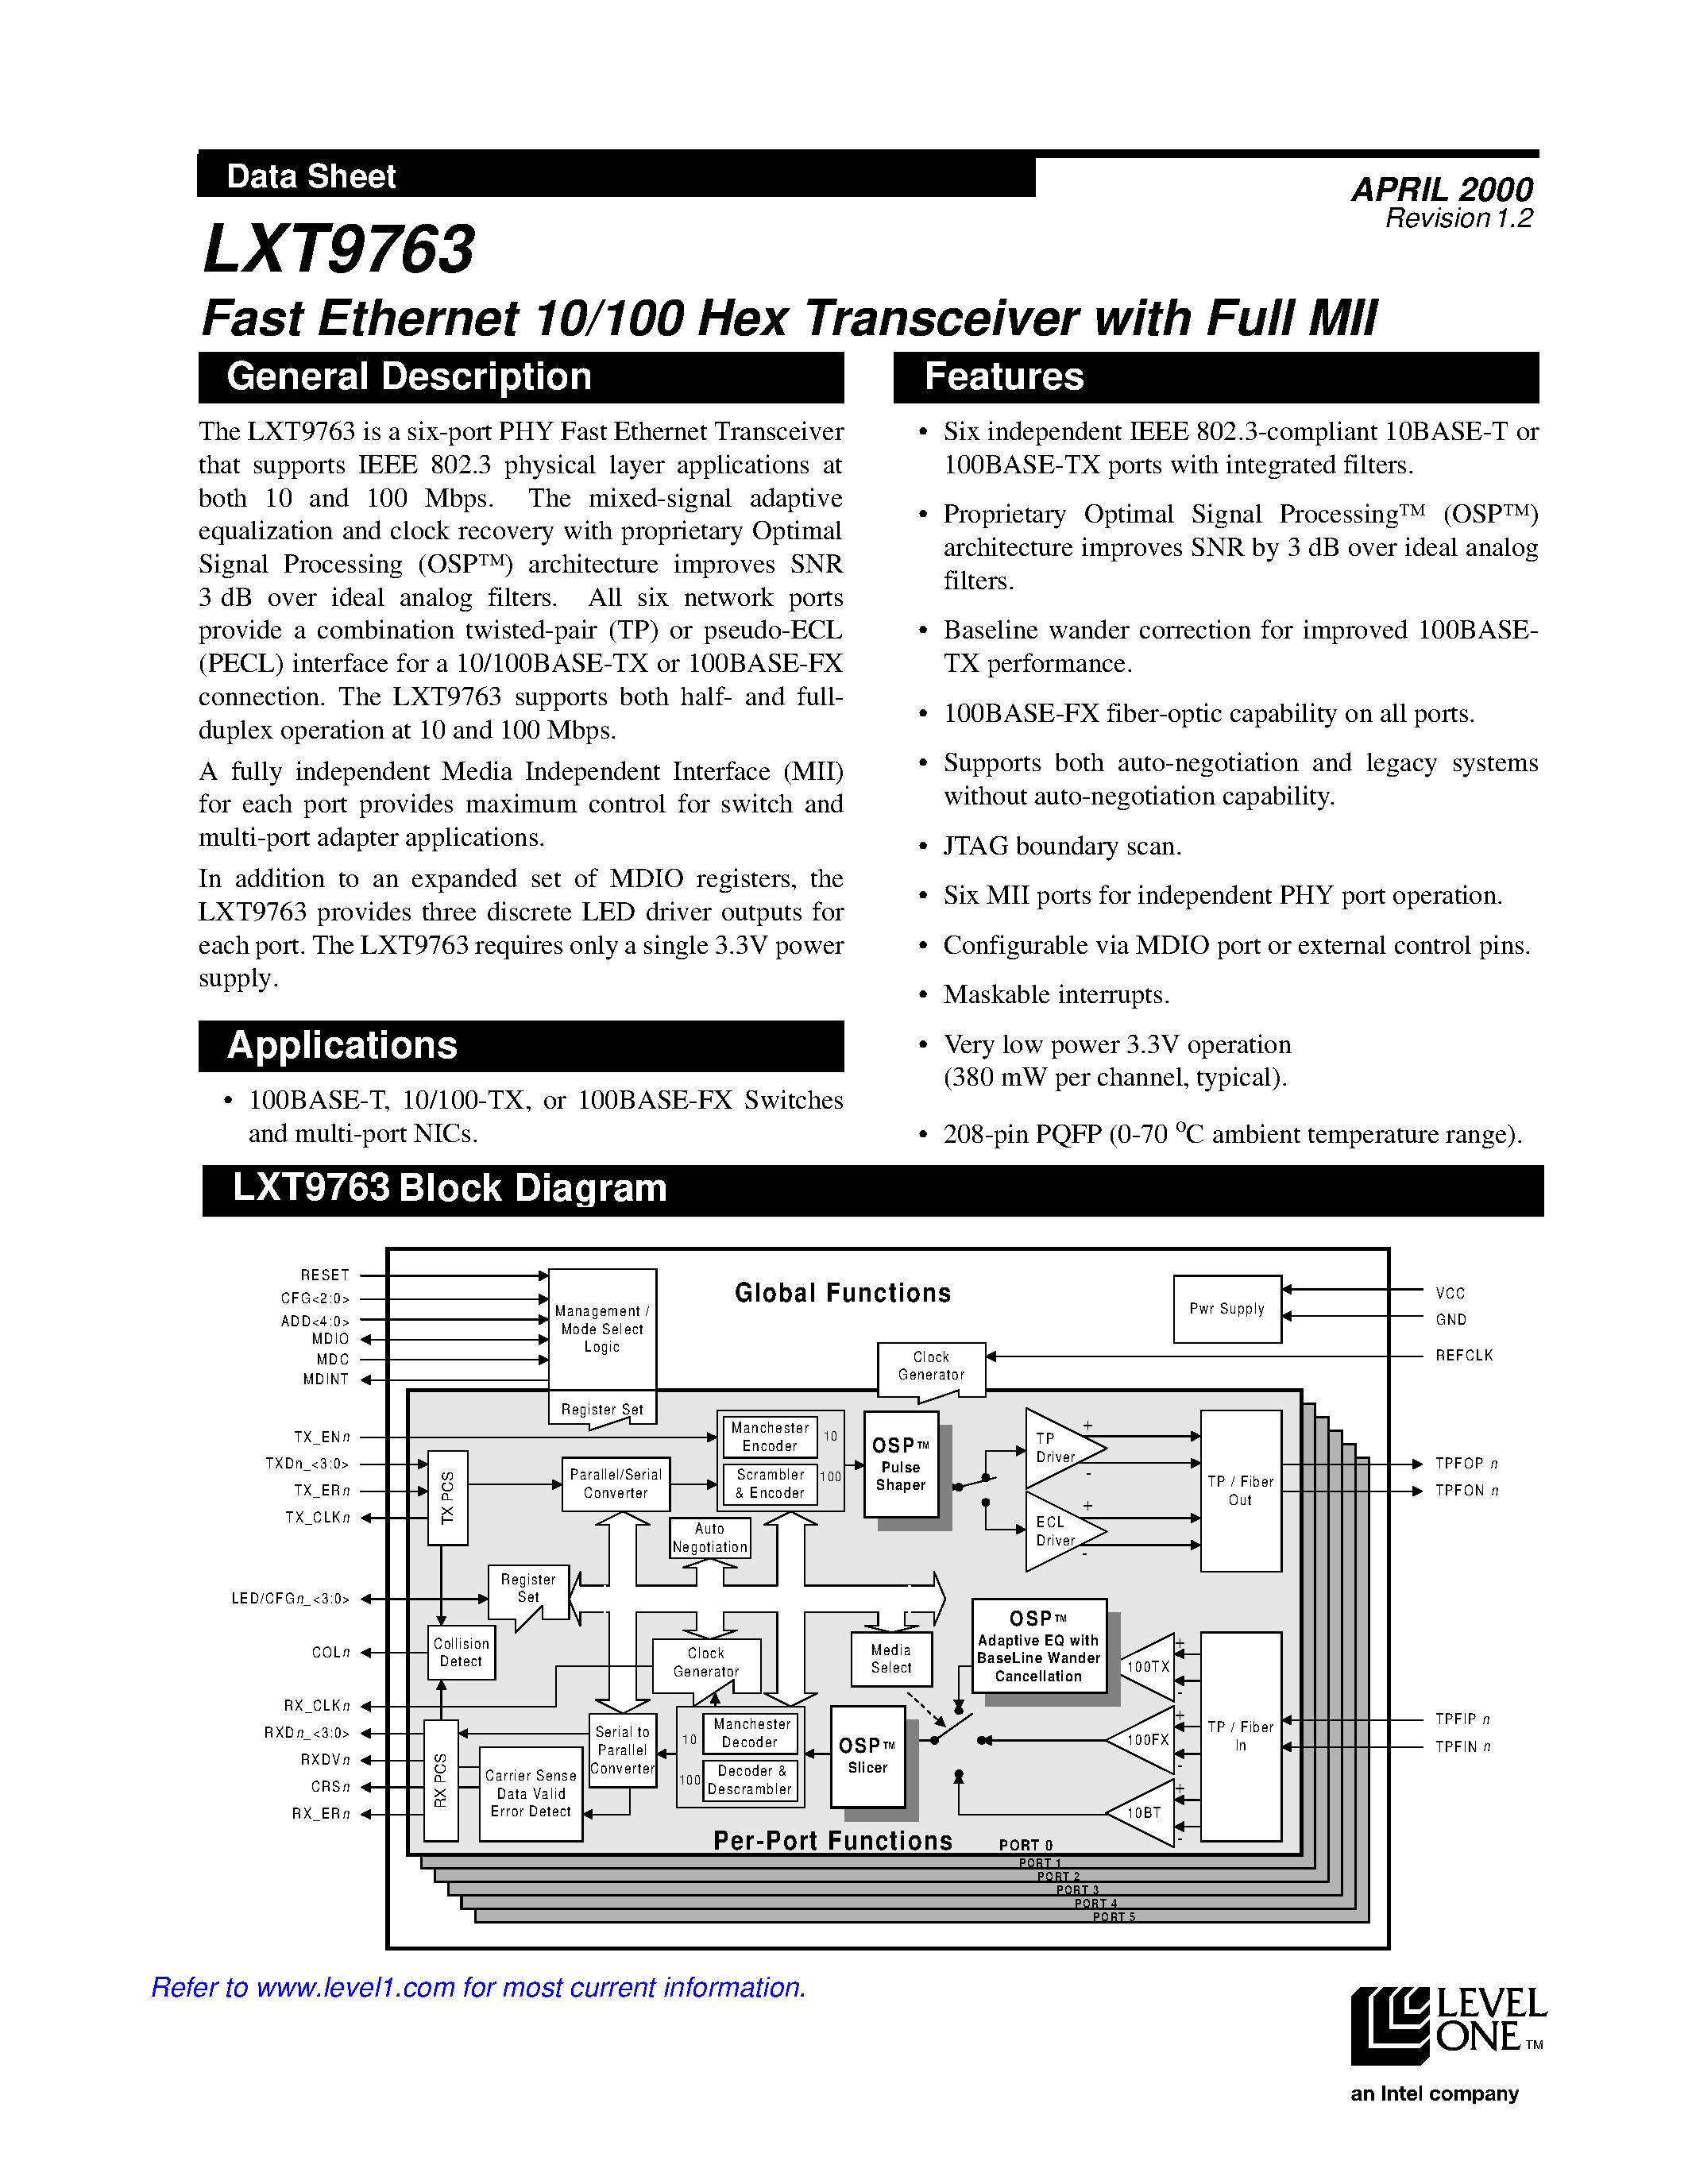 Datasheet LXT9763 - Fast Ethernet 10/100 Hex Teansceiver with Full MII page 1